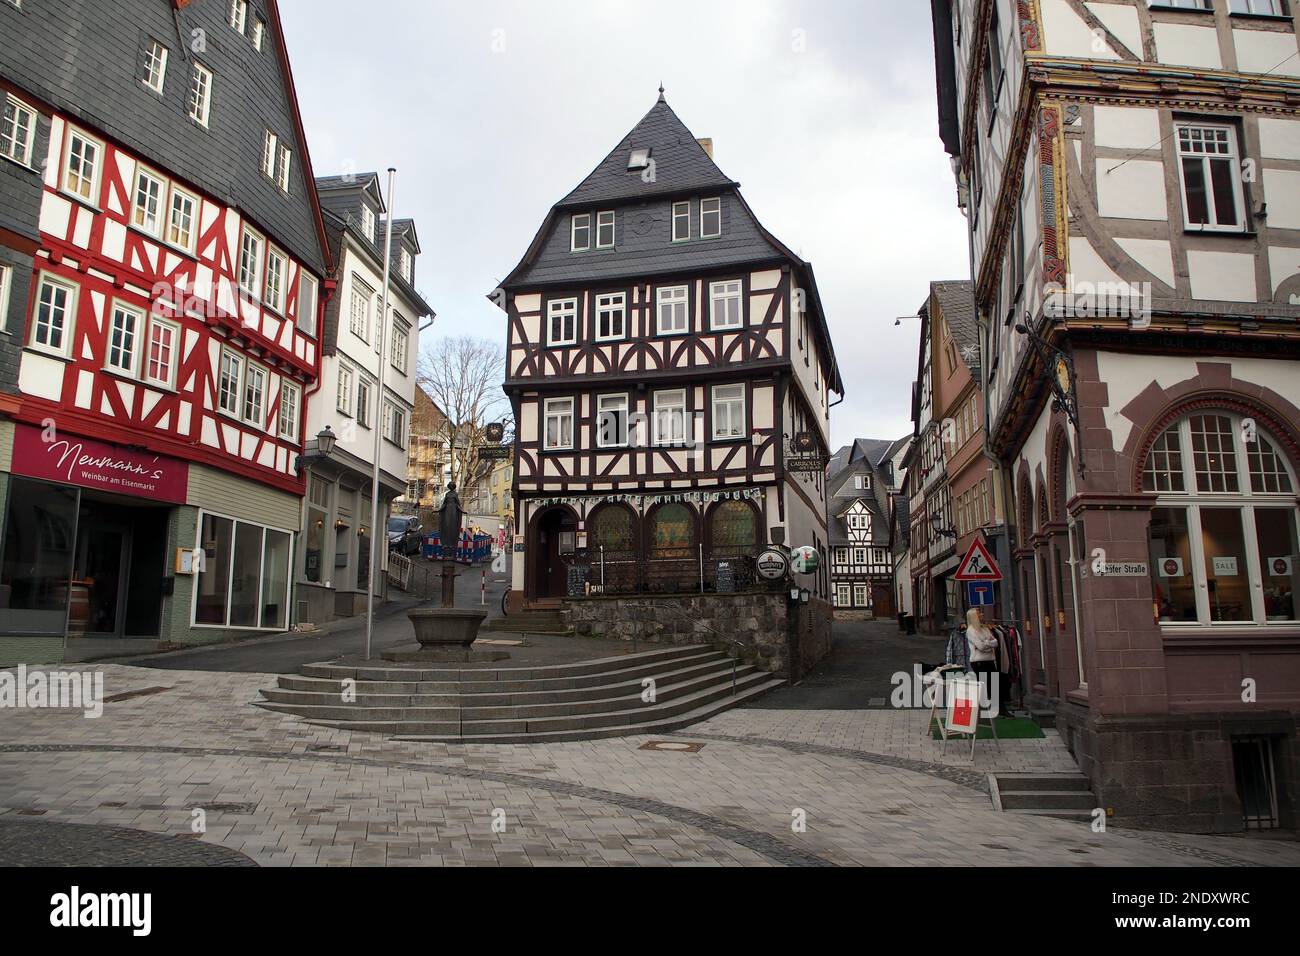 Eisenmarkt, small square lined by traditional timber-framed houses in the heart of the old town, Wetzlar, Germany Stock Photo